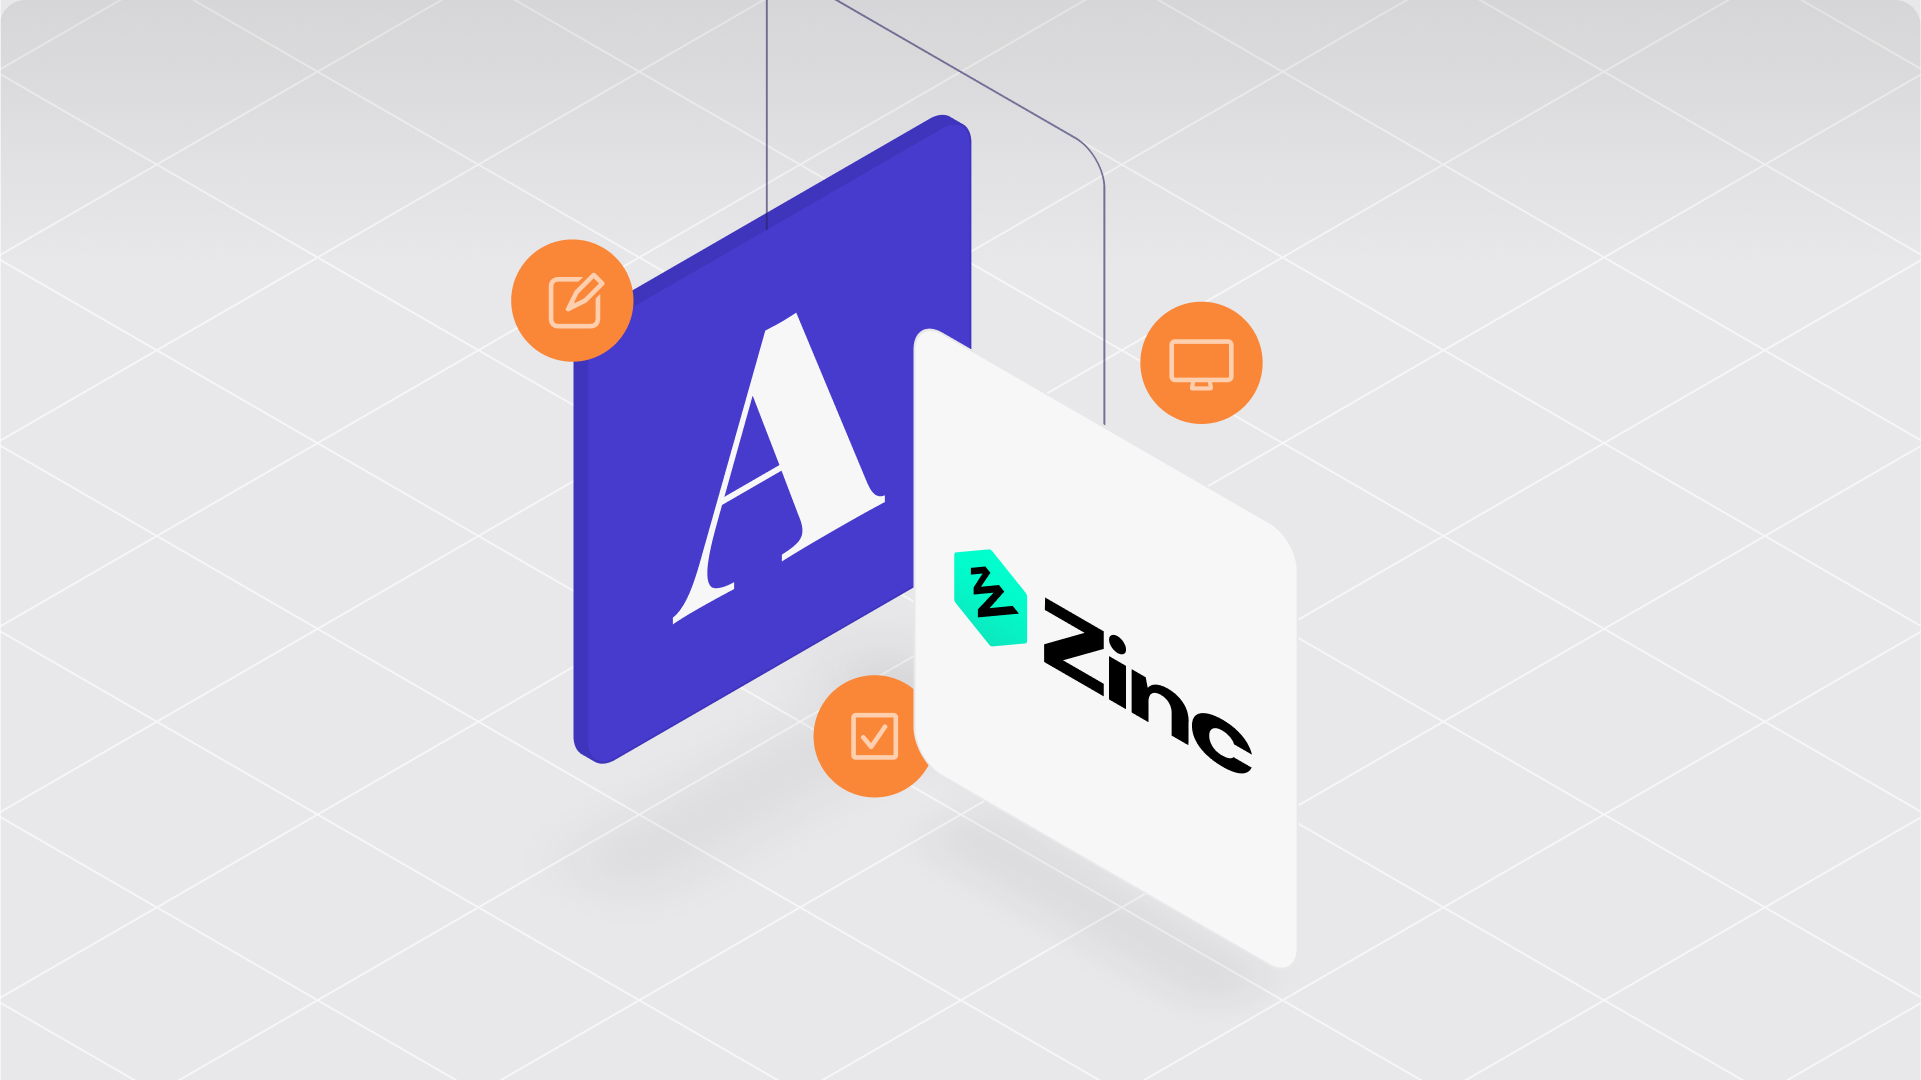 Ashby is partnering with Zinc to capture in-depth insights into candidate backgrounds and references worldwide